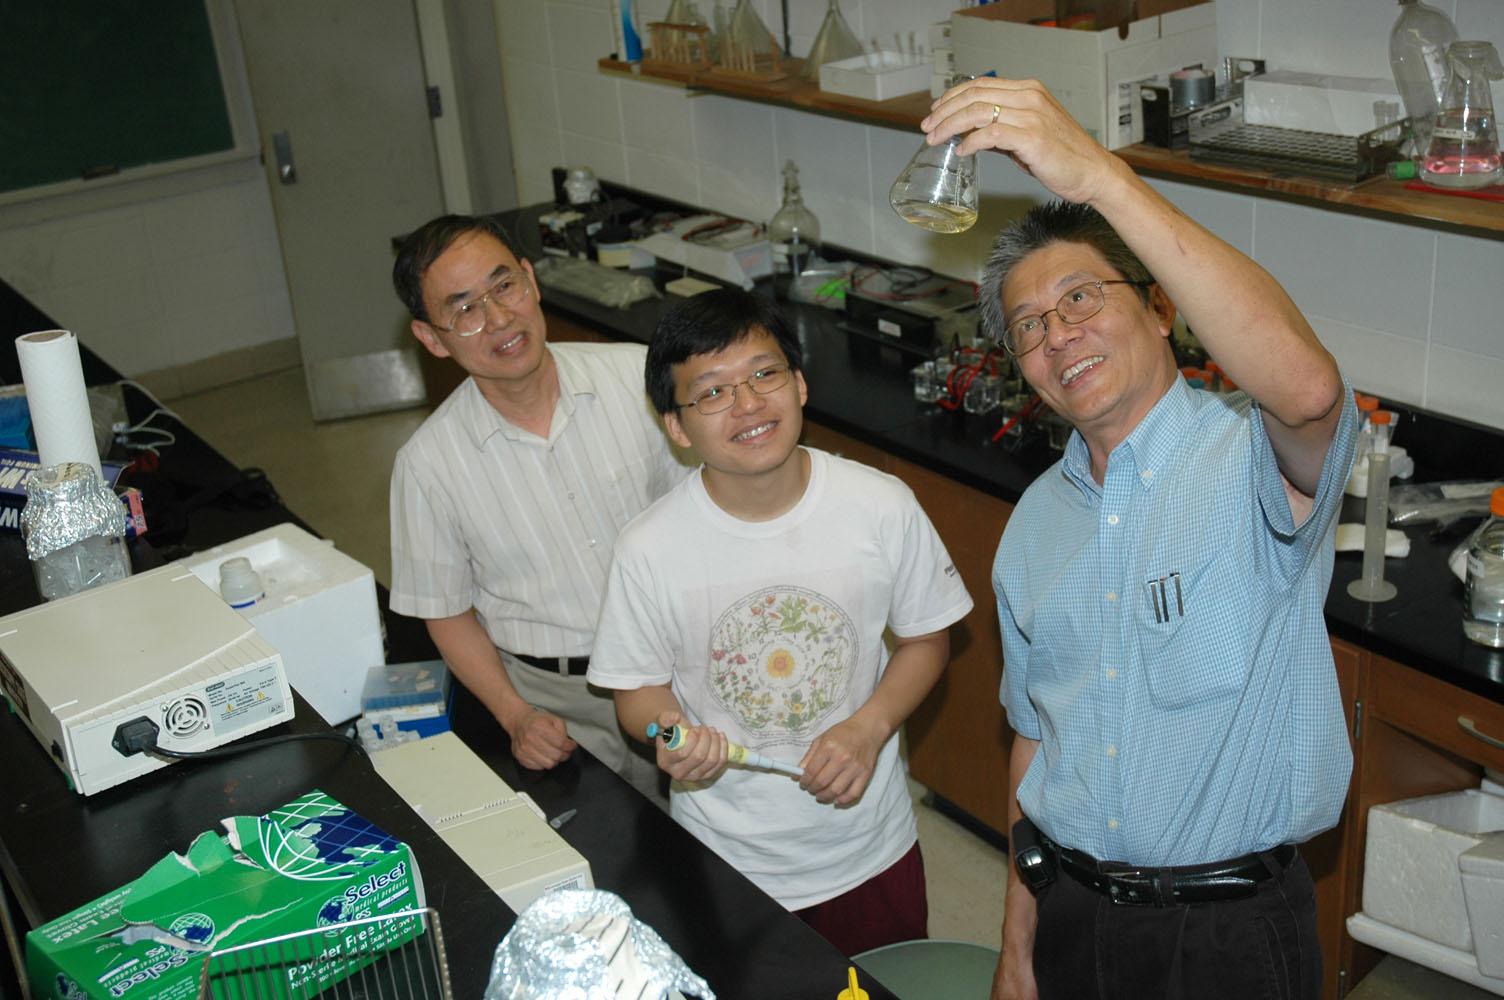 Preparing Mississippi State University's entry for this fall's International Genetically Engineered Machine competition are, from left, Dr. Din-Pow Ma, professor of biochemistry and molecular biology, Victor Ho, biochemistry doctoral student, and Dr. Filip To, professor of agricultural and biological engineering.